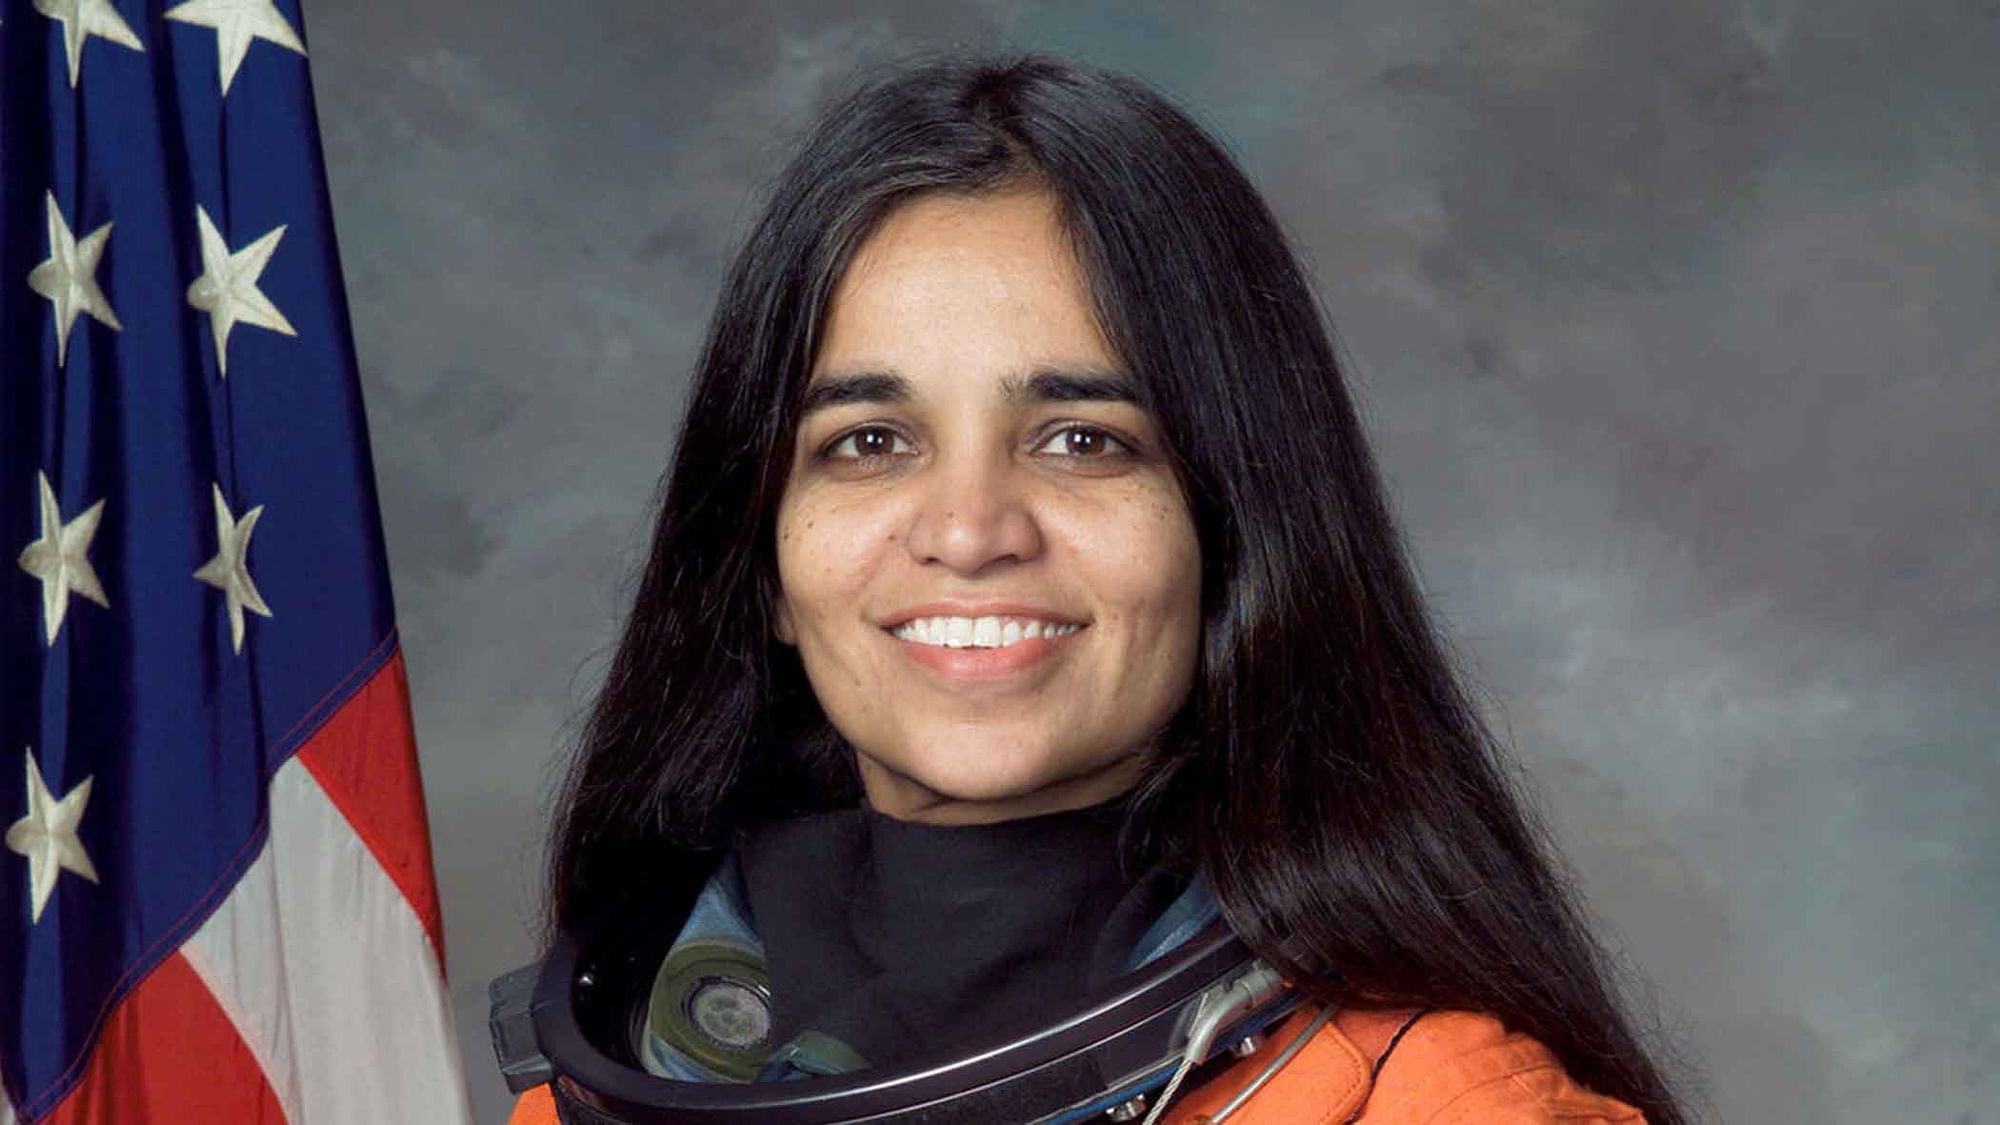 Kalpana Chawla, an Indian American astronaut and the first woman of Indian origin in space. (Photo Courtesy: <a href="https://editor.thequint.com/story/99f23a2a-5705-4db4-9375-10486b2b0560">NASA</a>)